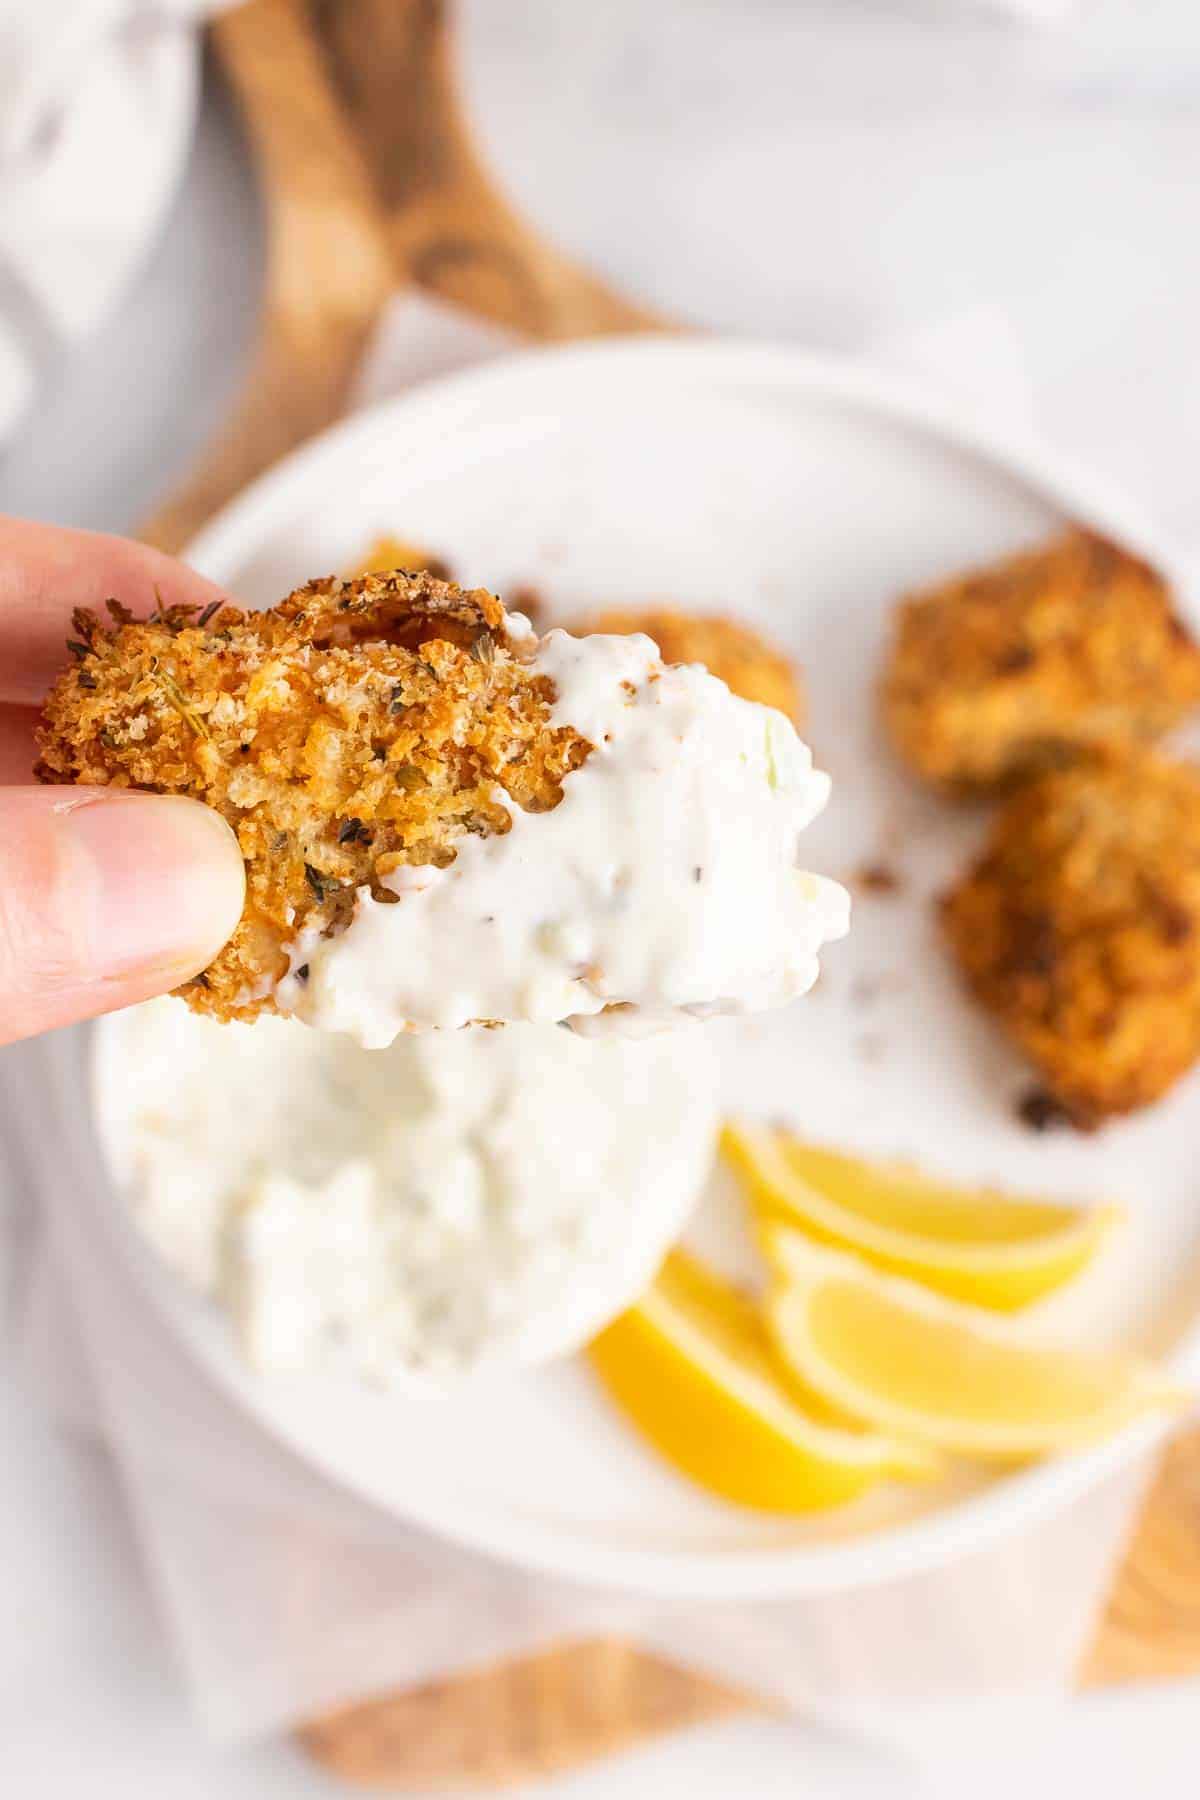 Hand holding chicken tender with tartar sauce over plate